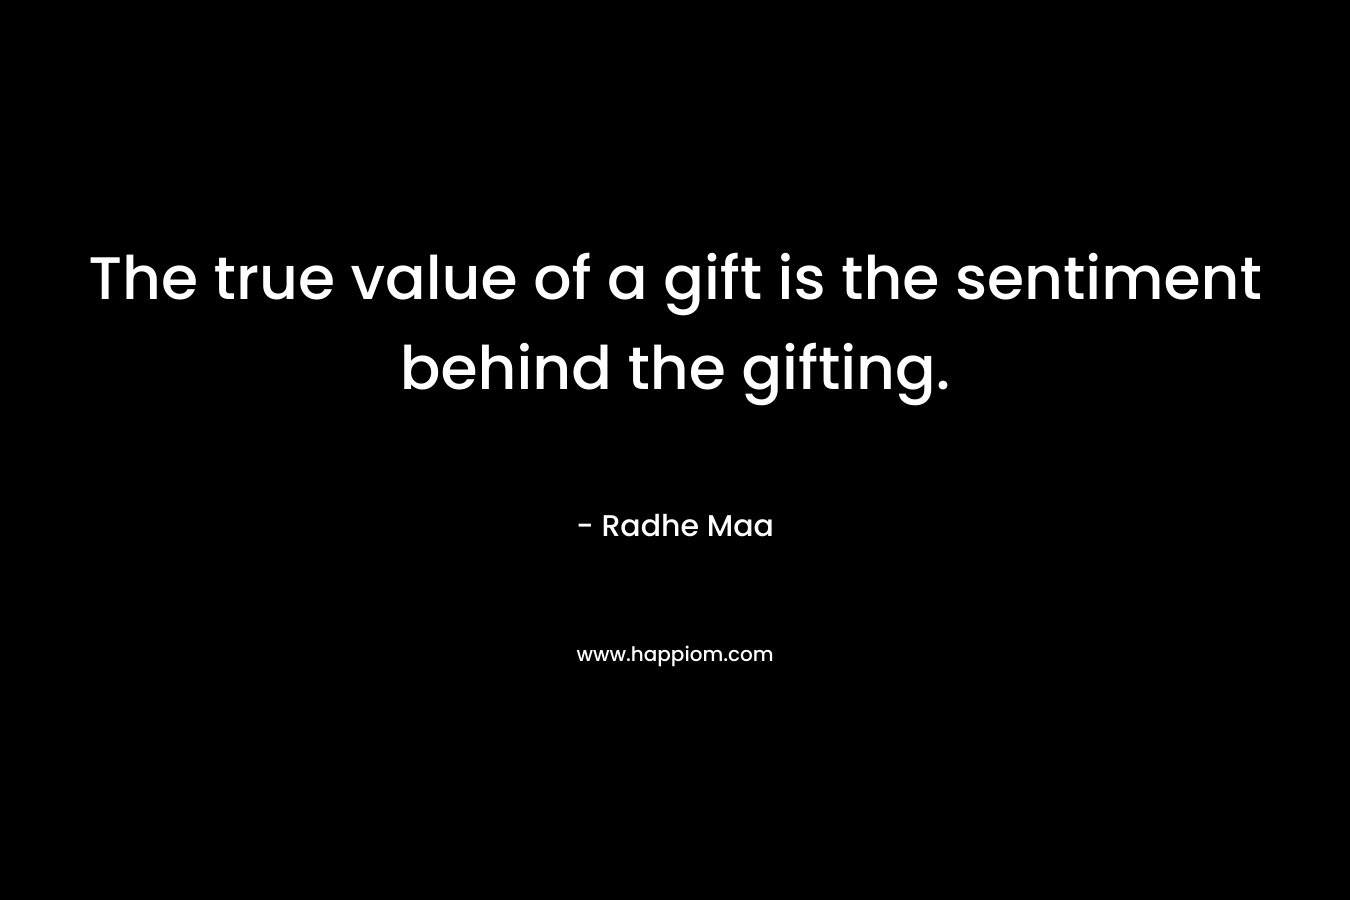 The true value of a gift is the sentiment behind the gifting.